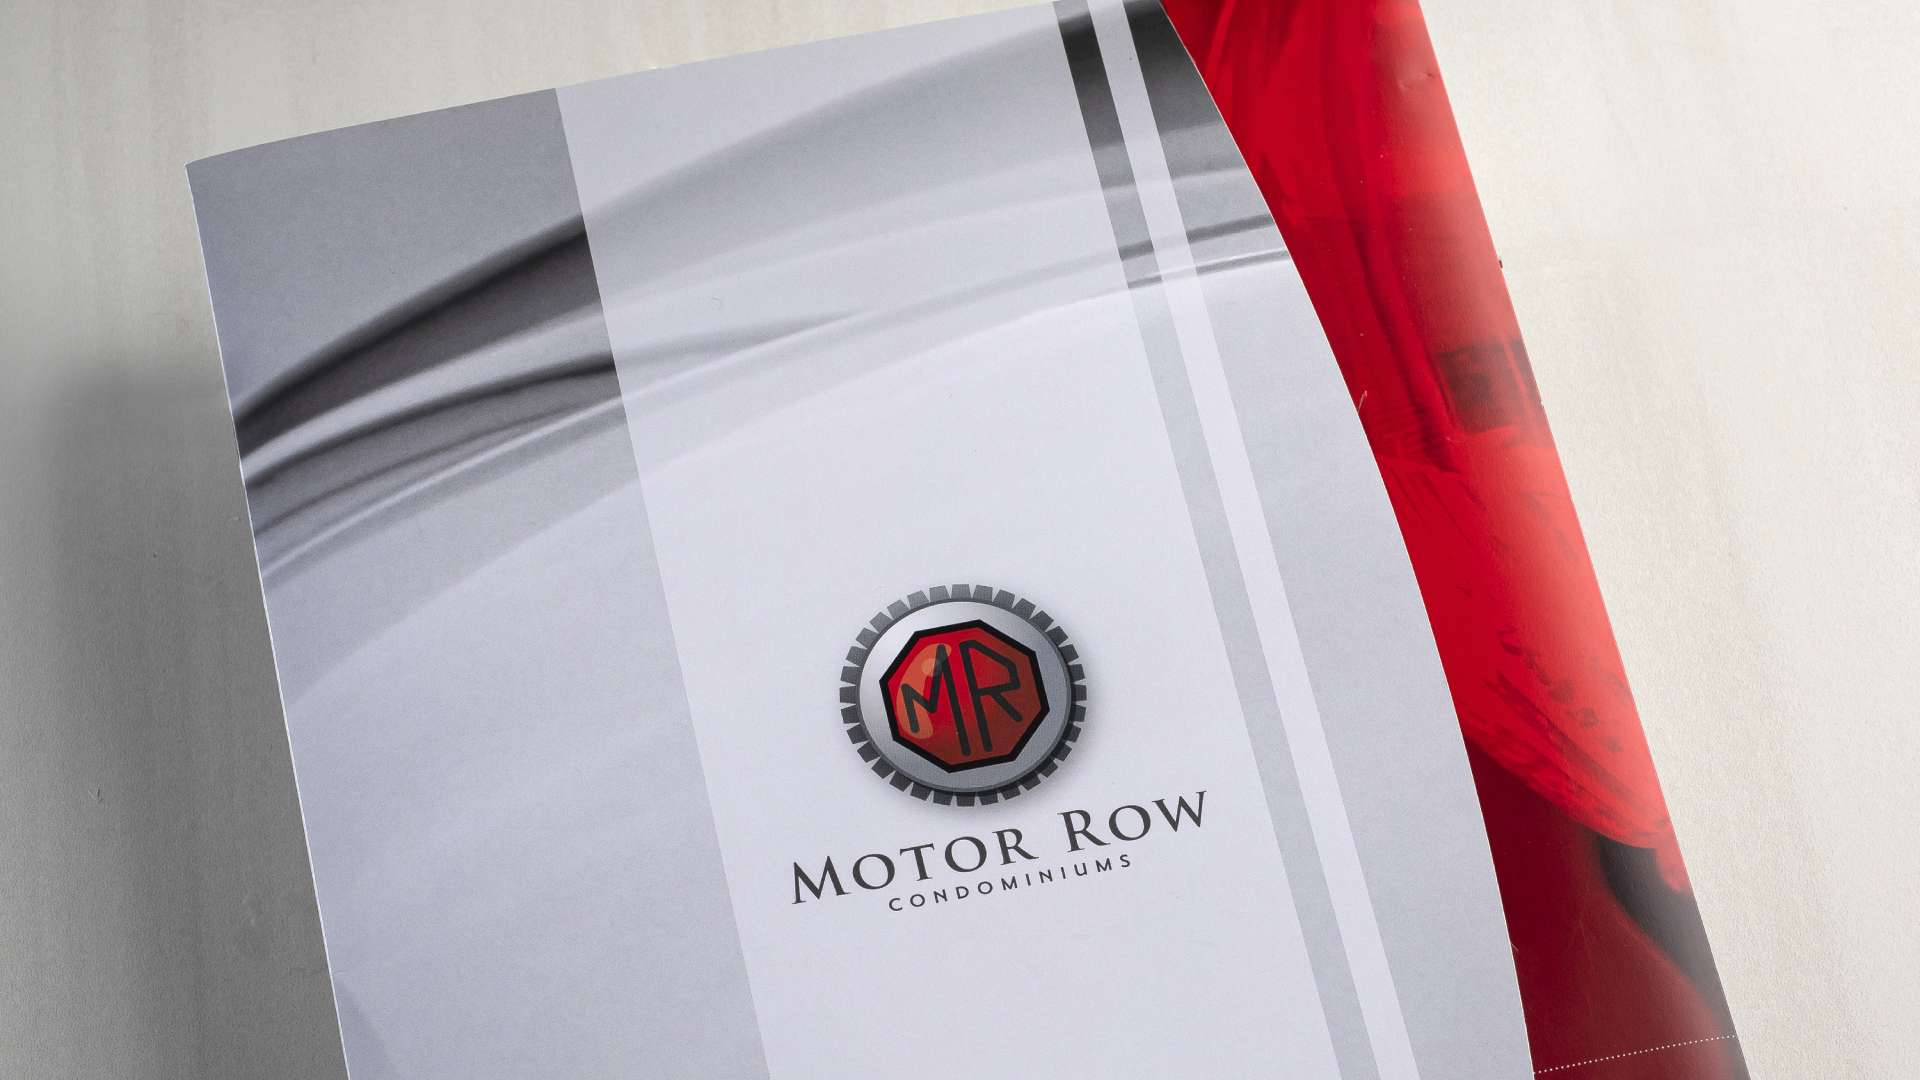 Print marketing collateral kit designed for Motor Row